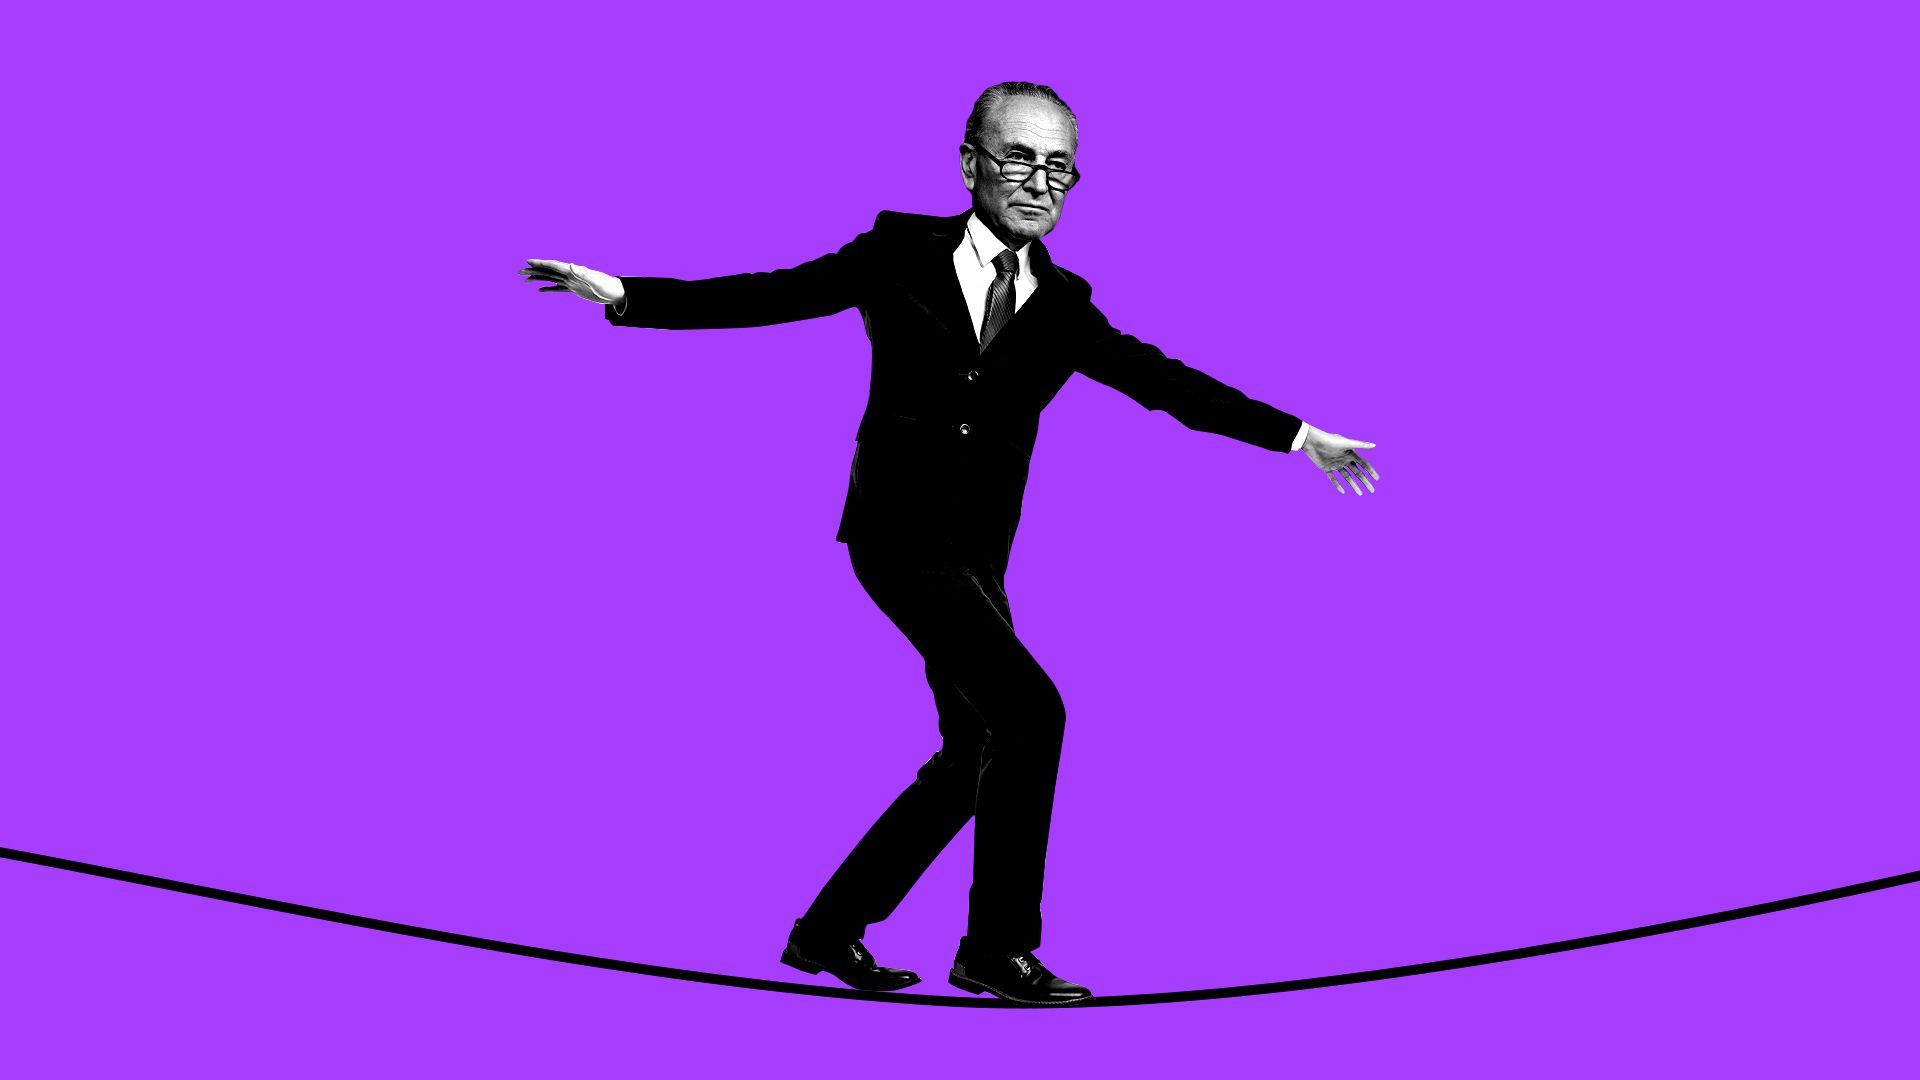 Illustration of Chuck Schumer on a tightrope.